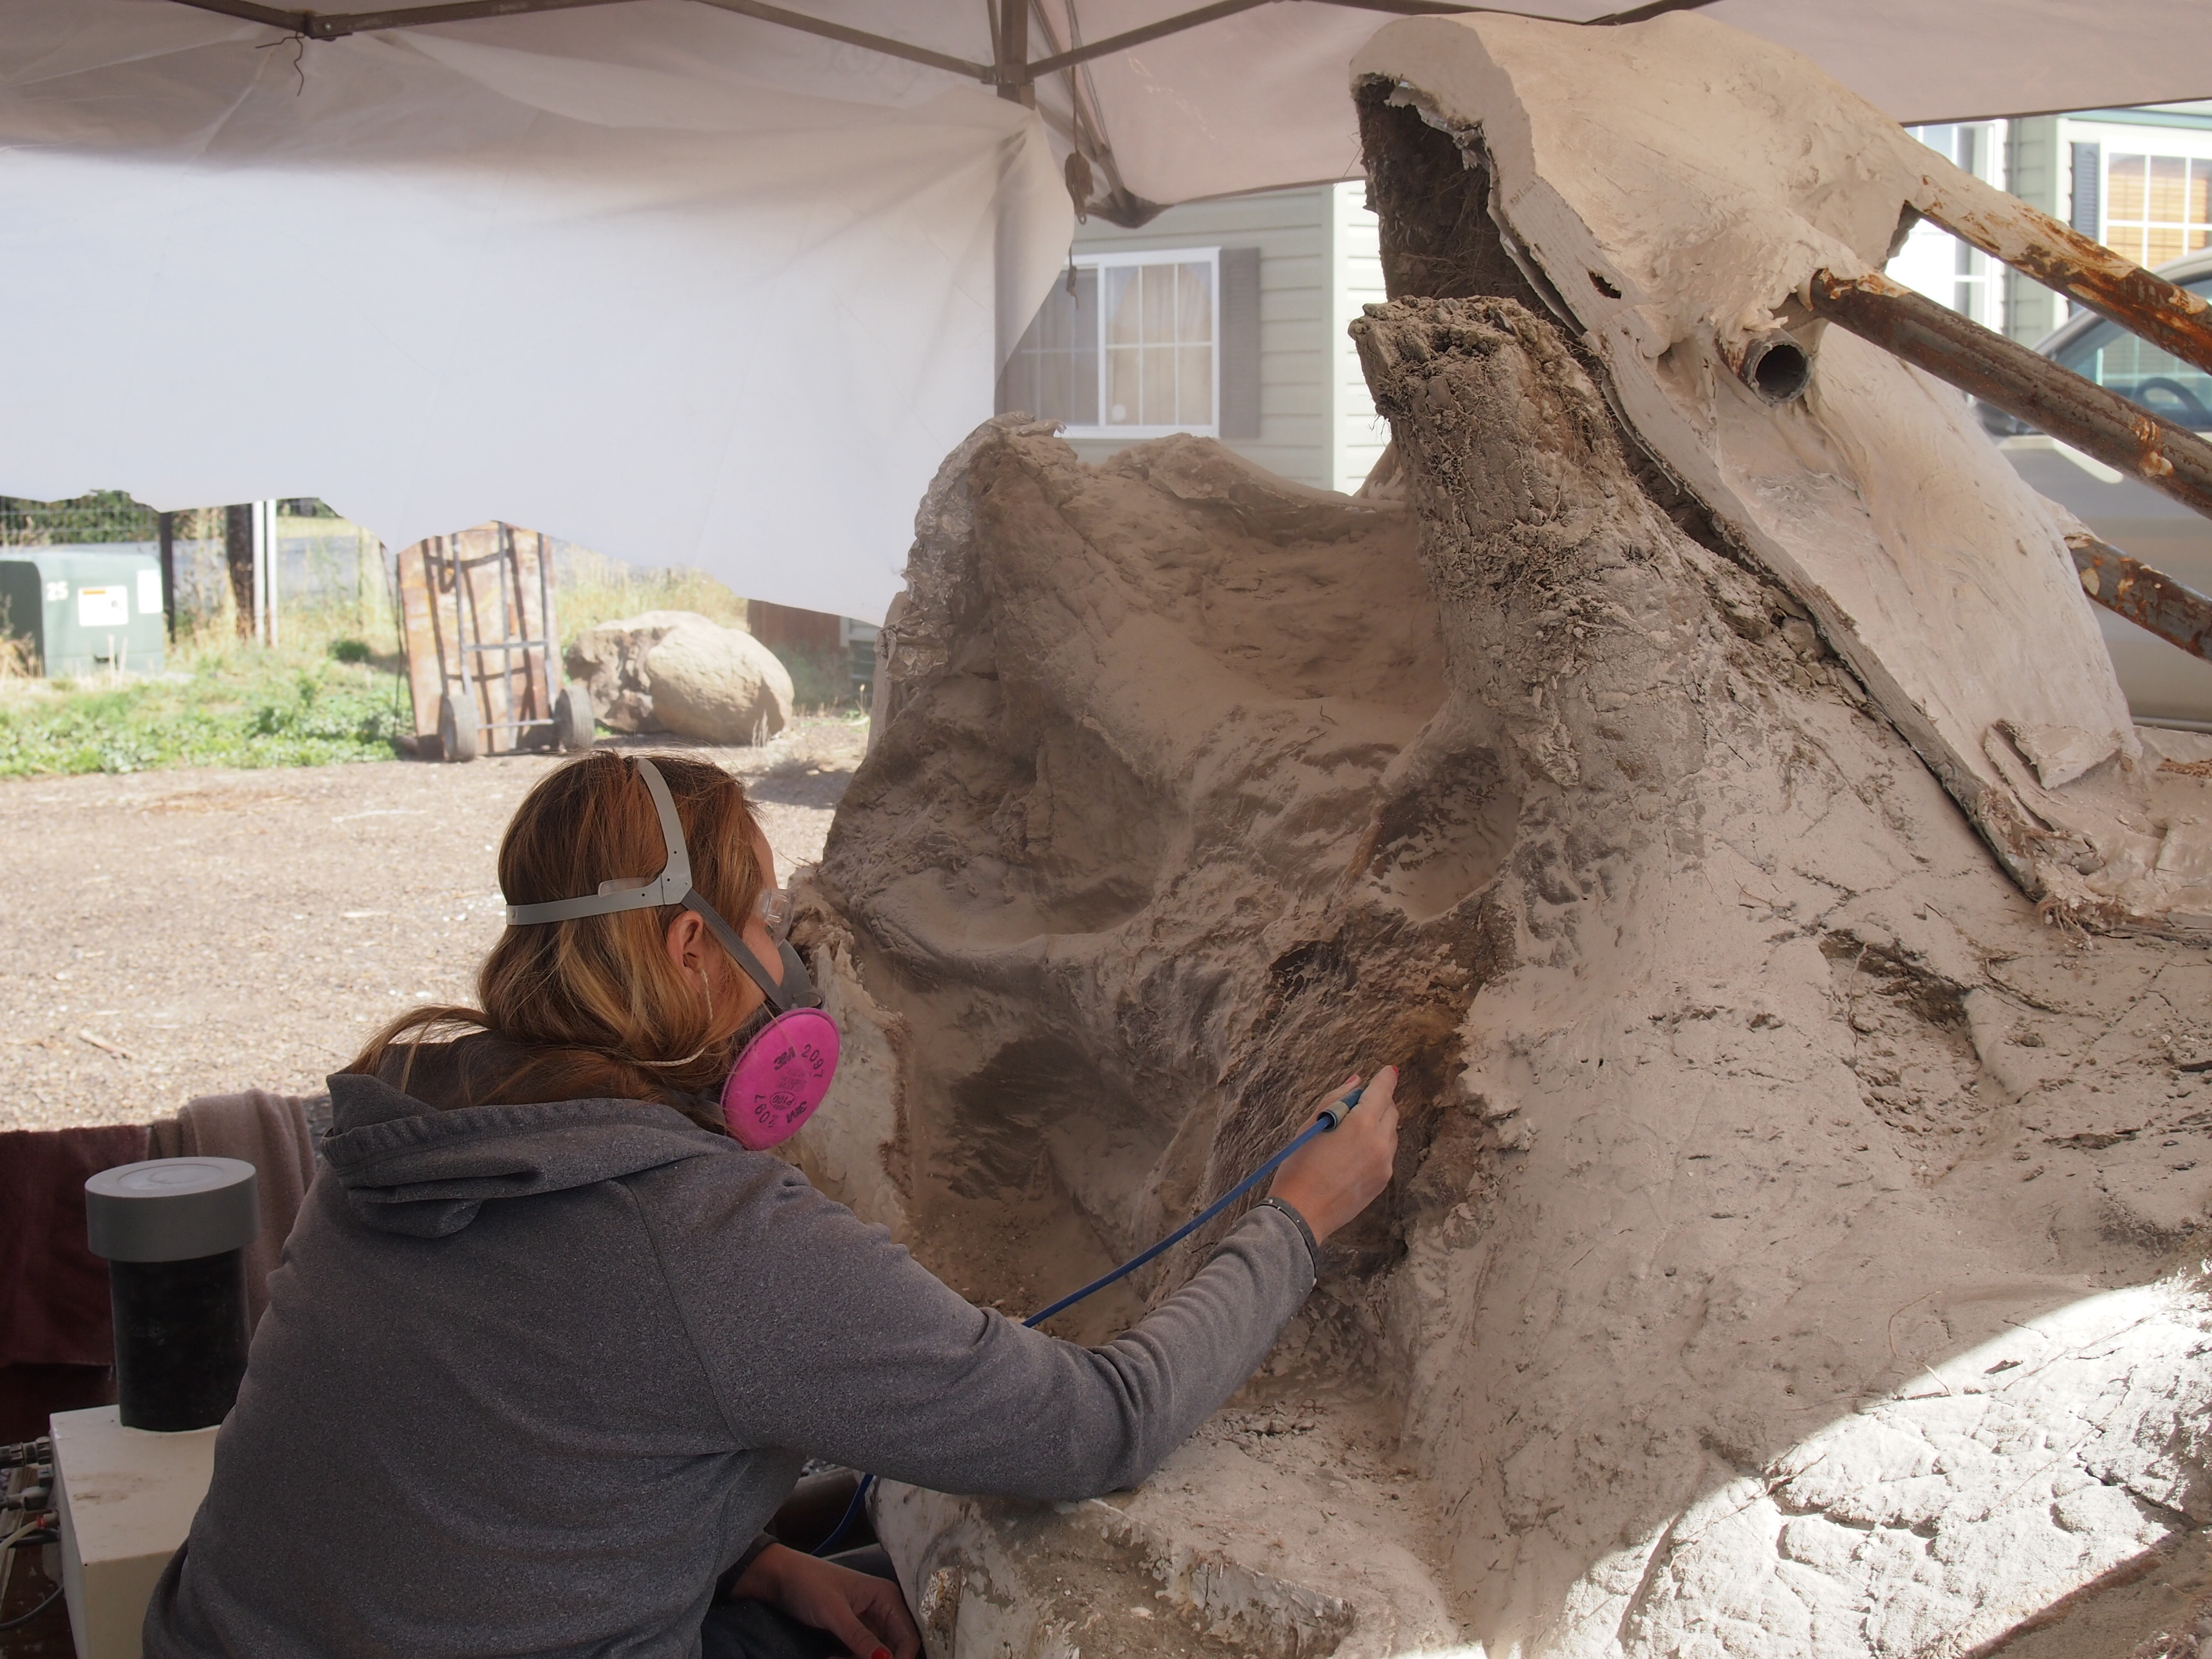 Back at the lab, the skull has been unloaded and now we are exposing the left side. Katie is using a microblaster with baking soda to remove the sand matrix.